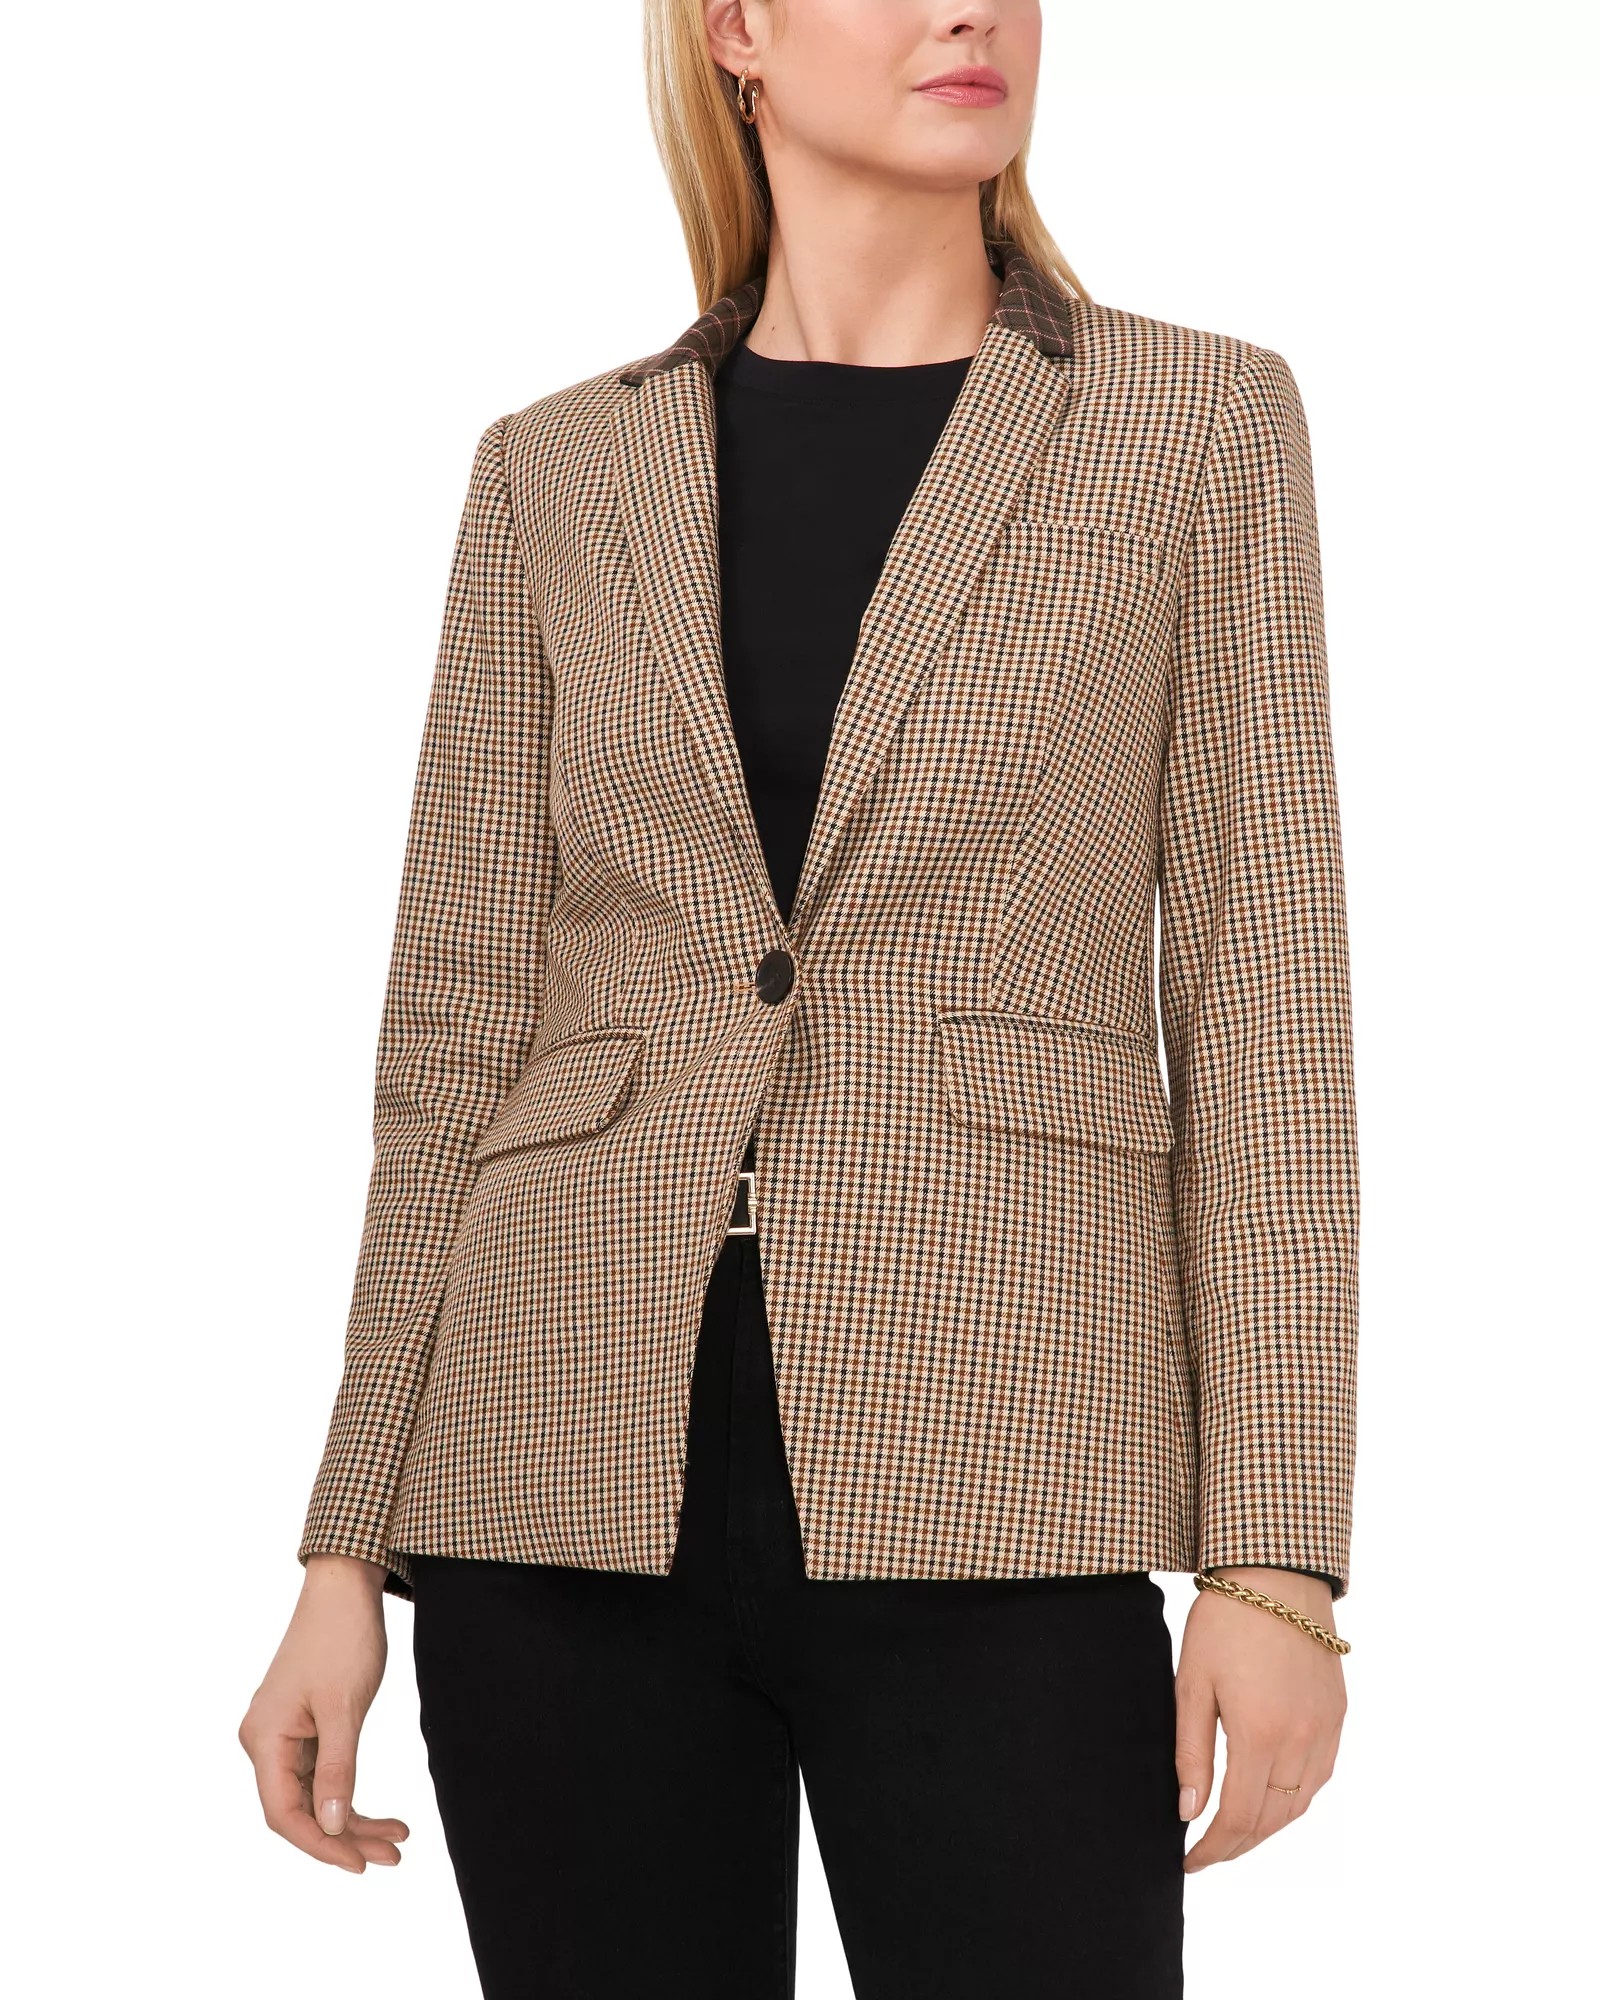 Vince Camuto Womens Suit Separate Work Wear Two-Button Blazer Jacket BHFO  1521